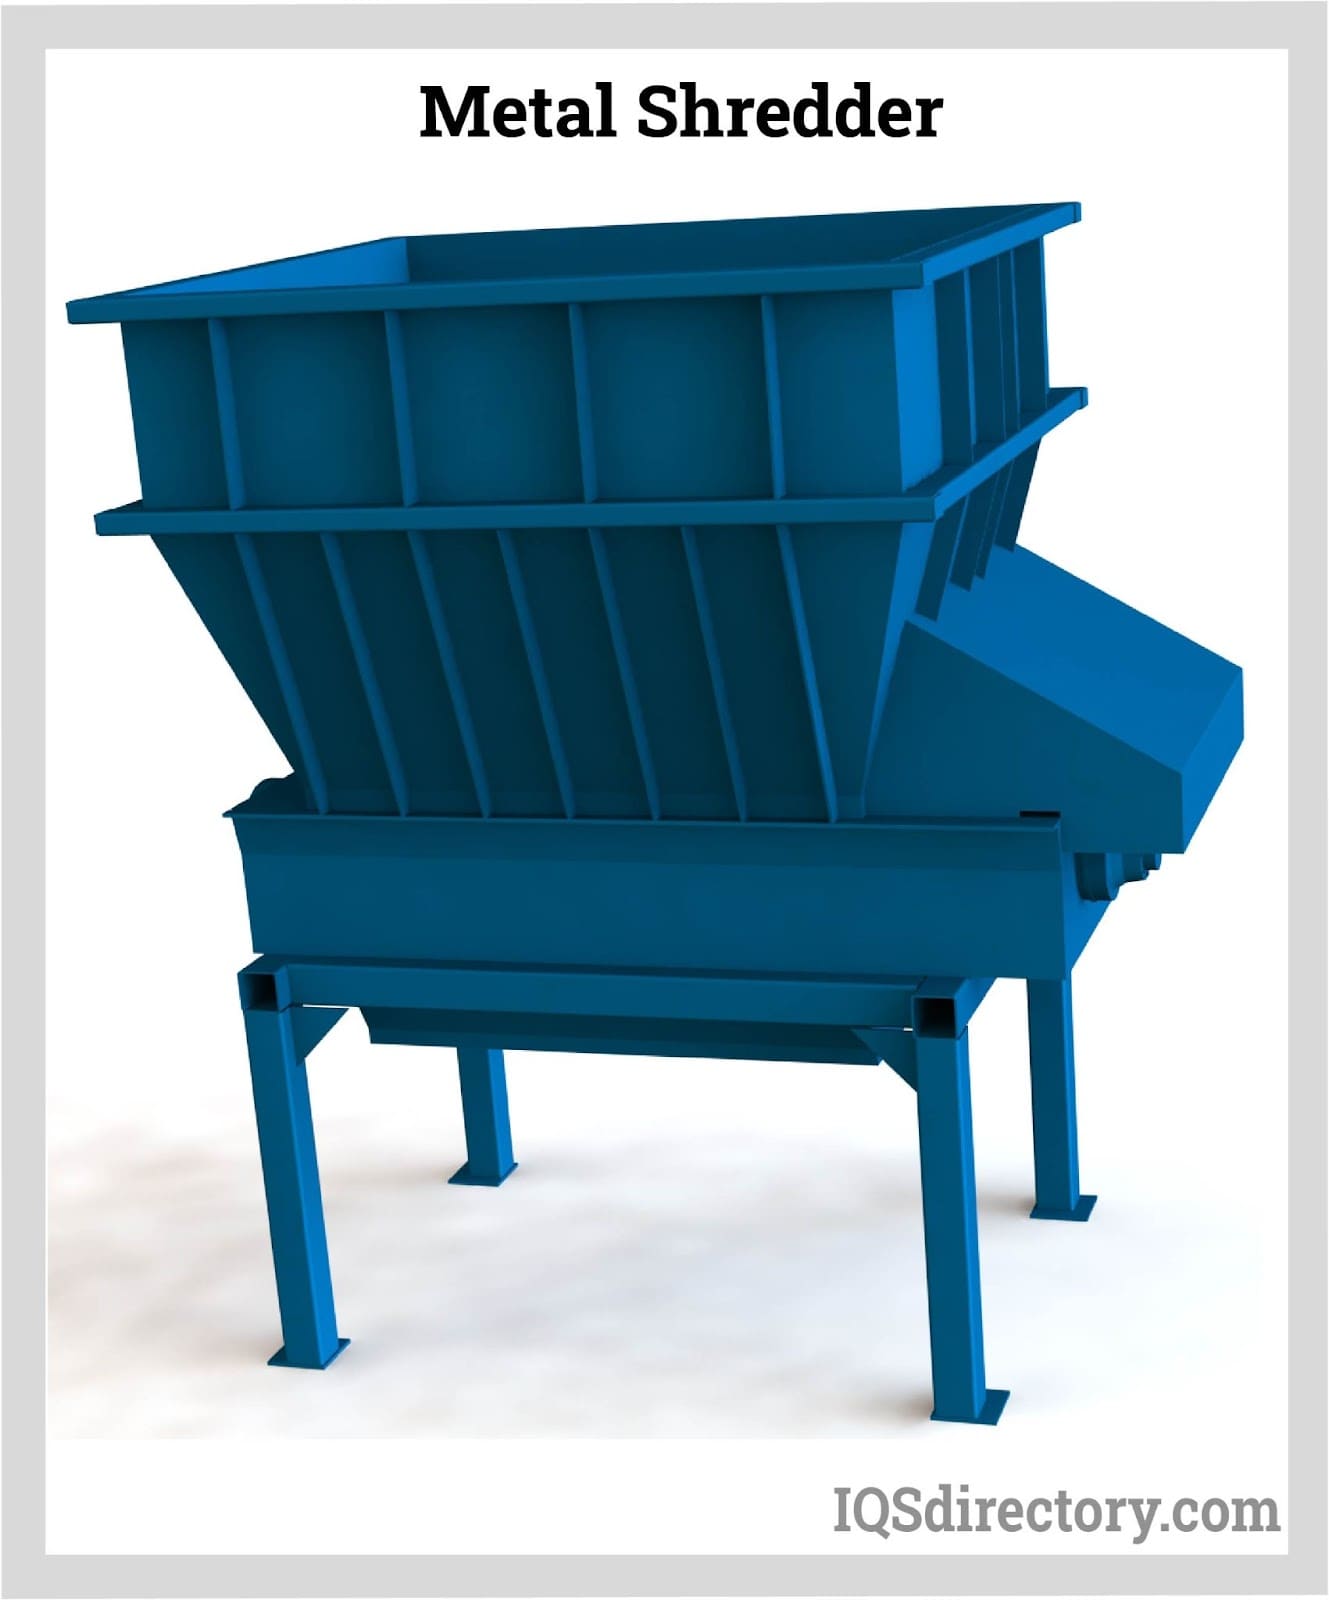 2022 Small Double Shaft Rubber Recycling Crusher / Metal Shredder For  Industrial Waste Tire Treatment Metal Plastic Wood